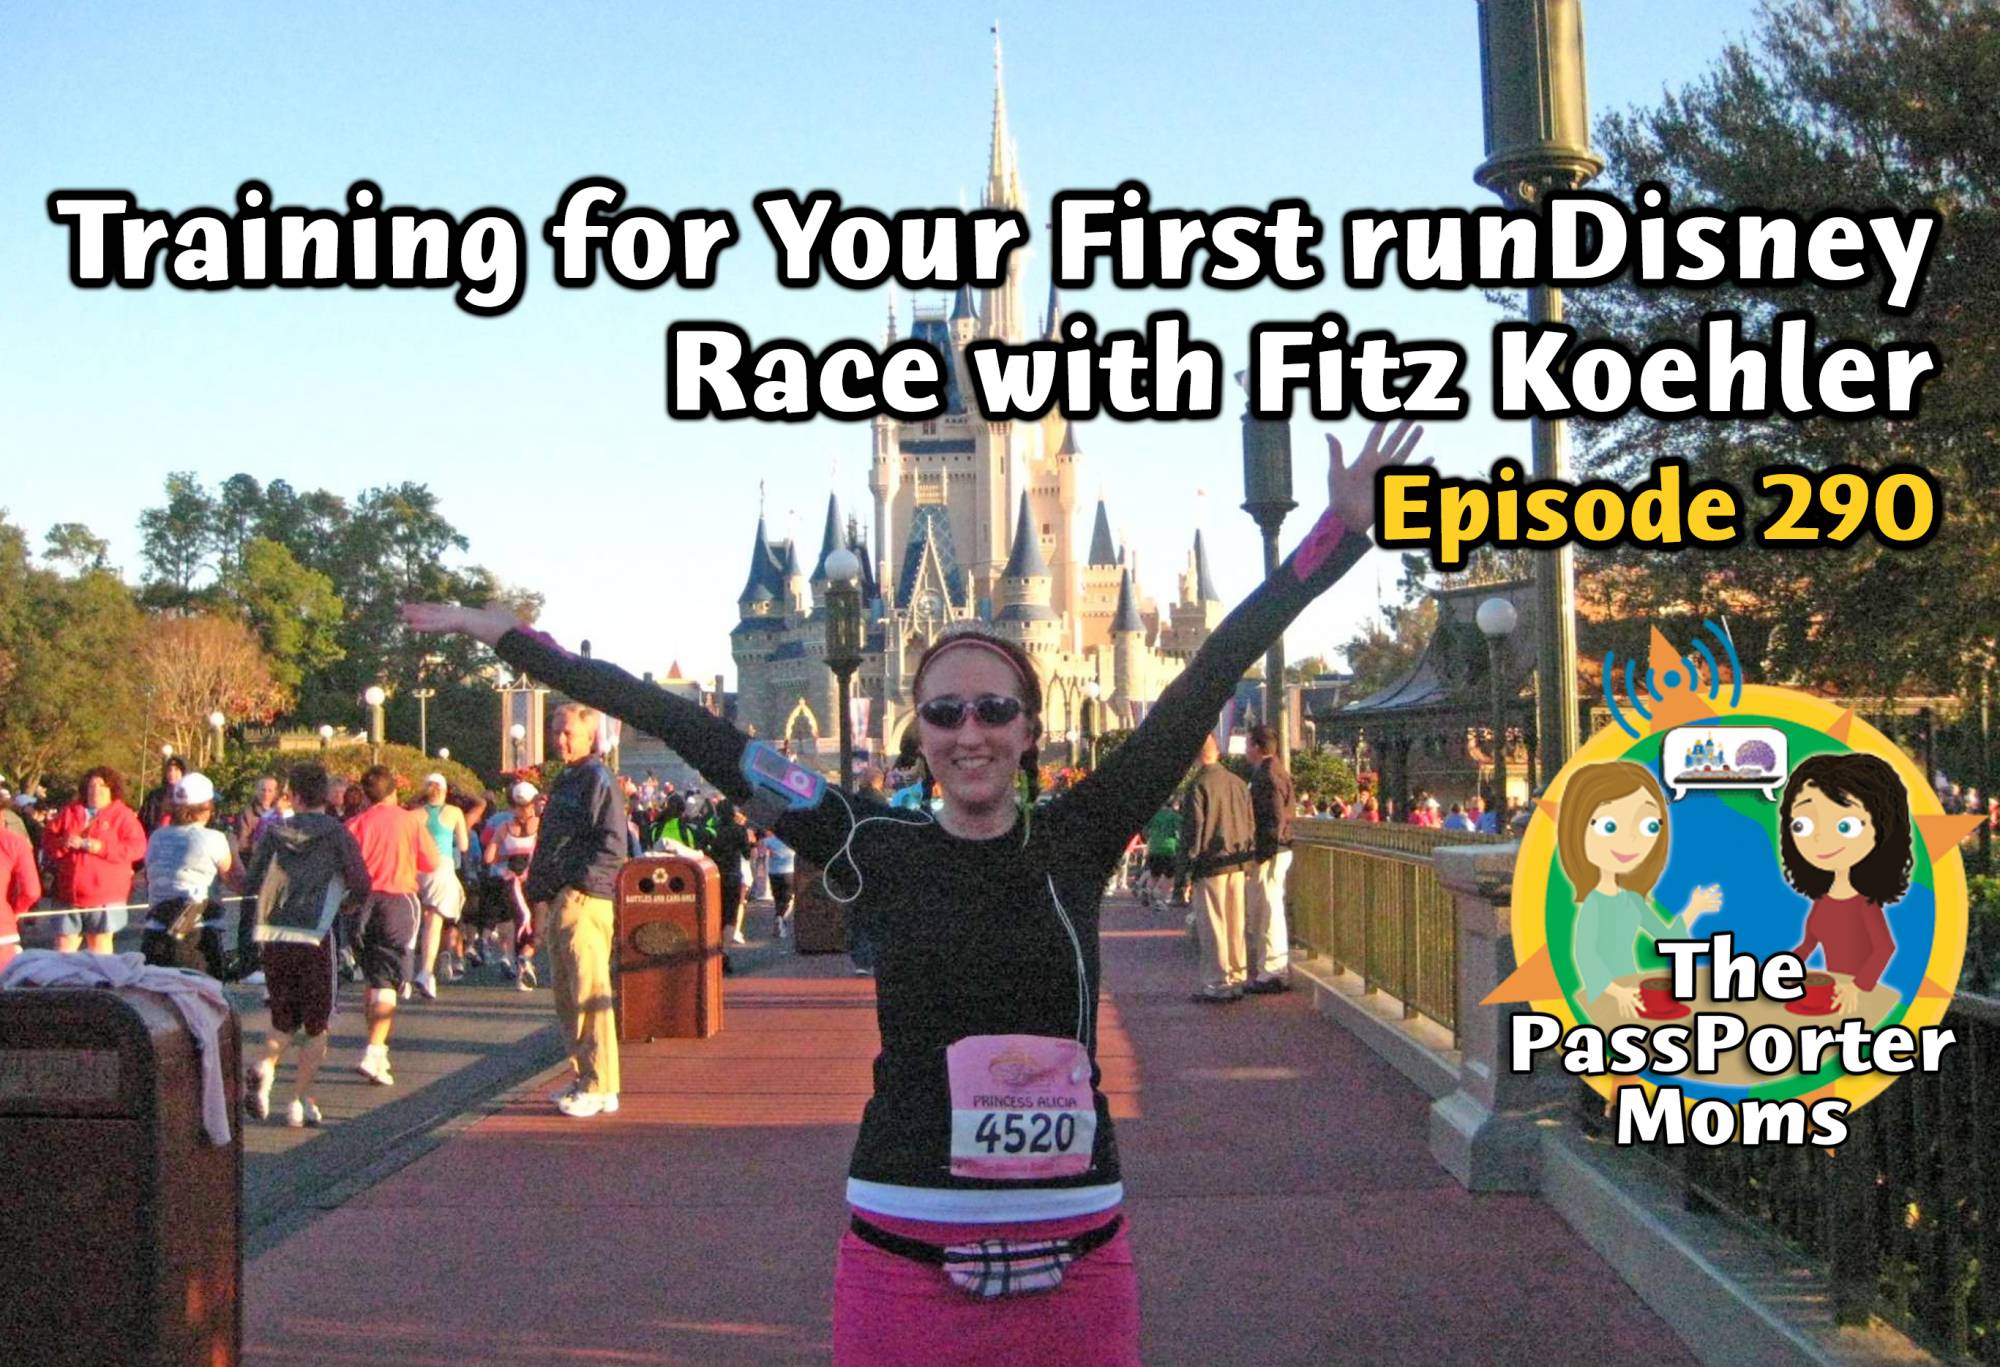 Training For Your First runDisney Race